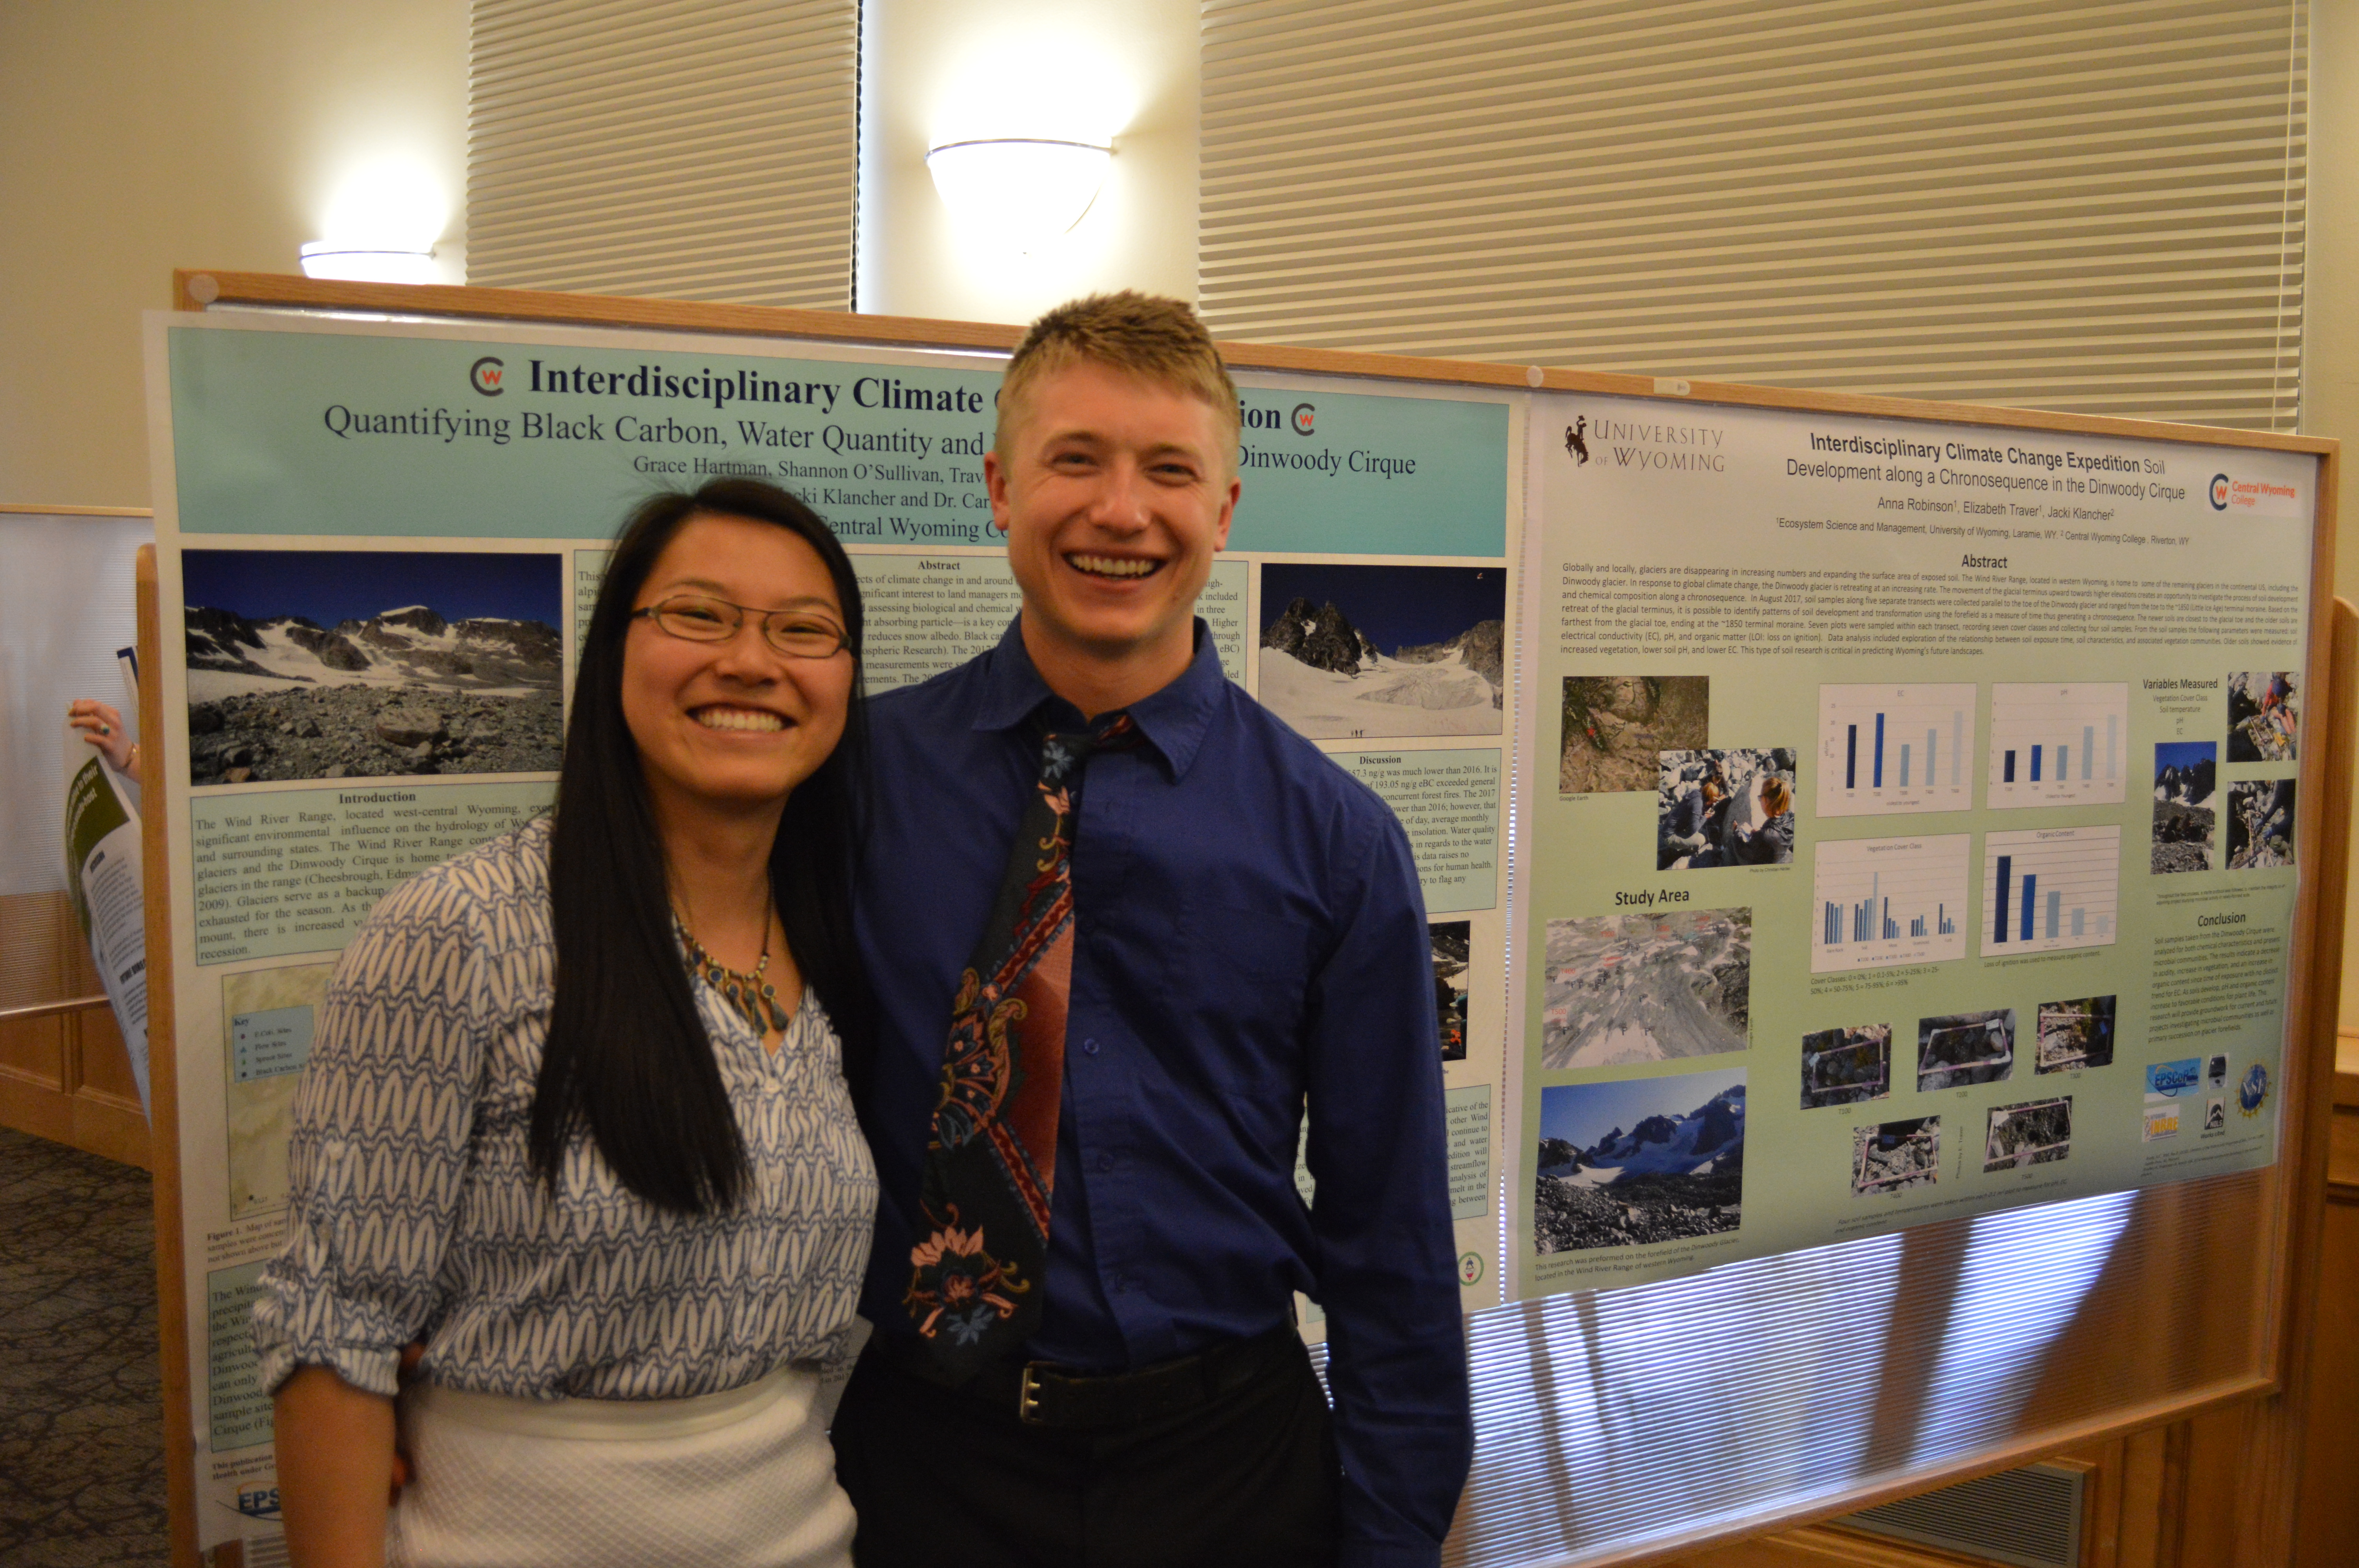 CWC alumni Grace Hartman and Marten Baur pose in front of their presentation poster for their research on linking science to contemporary issues facing greater societies at the University of Wyoming's Undergraduate Research Day